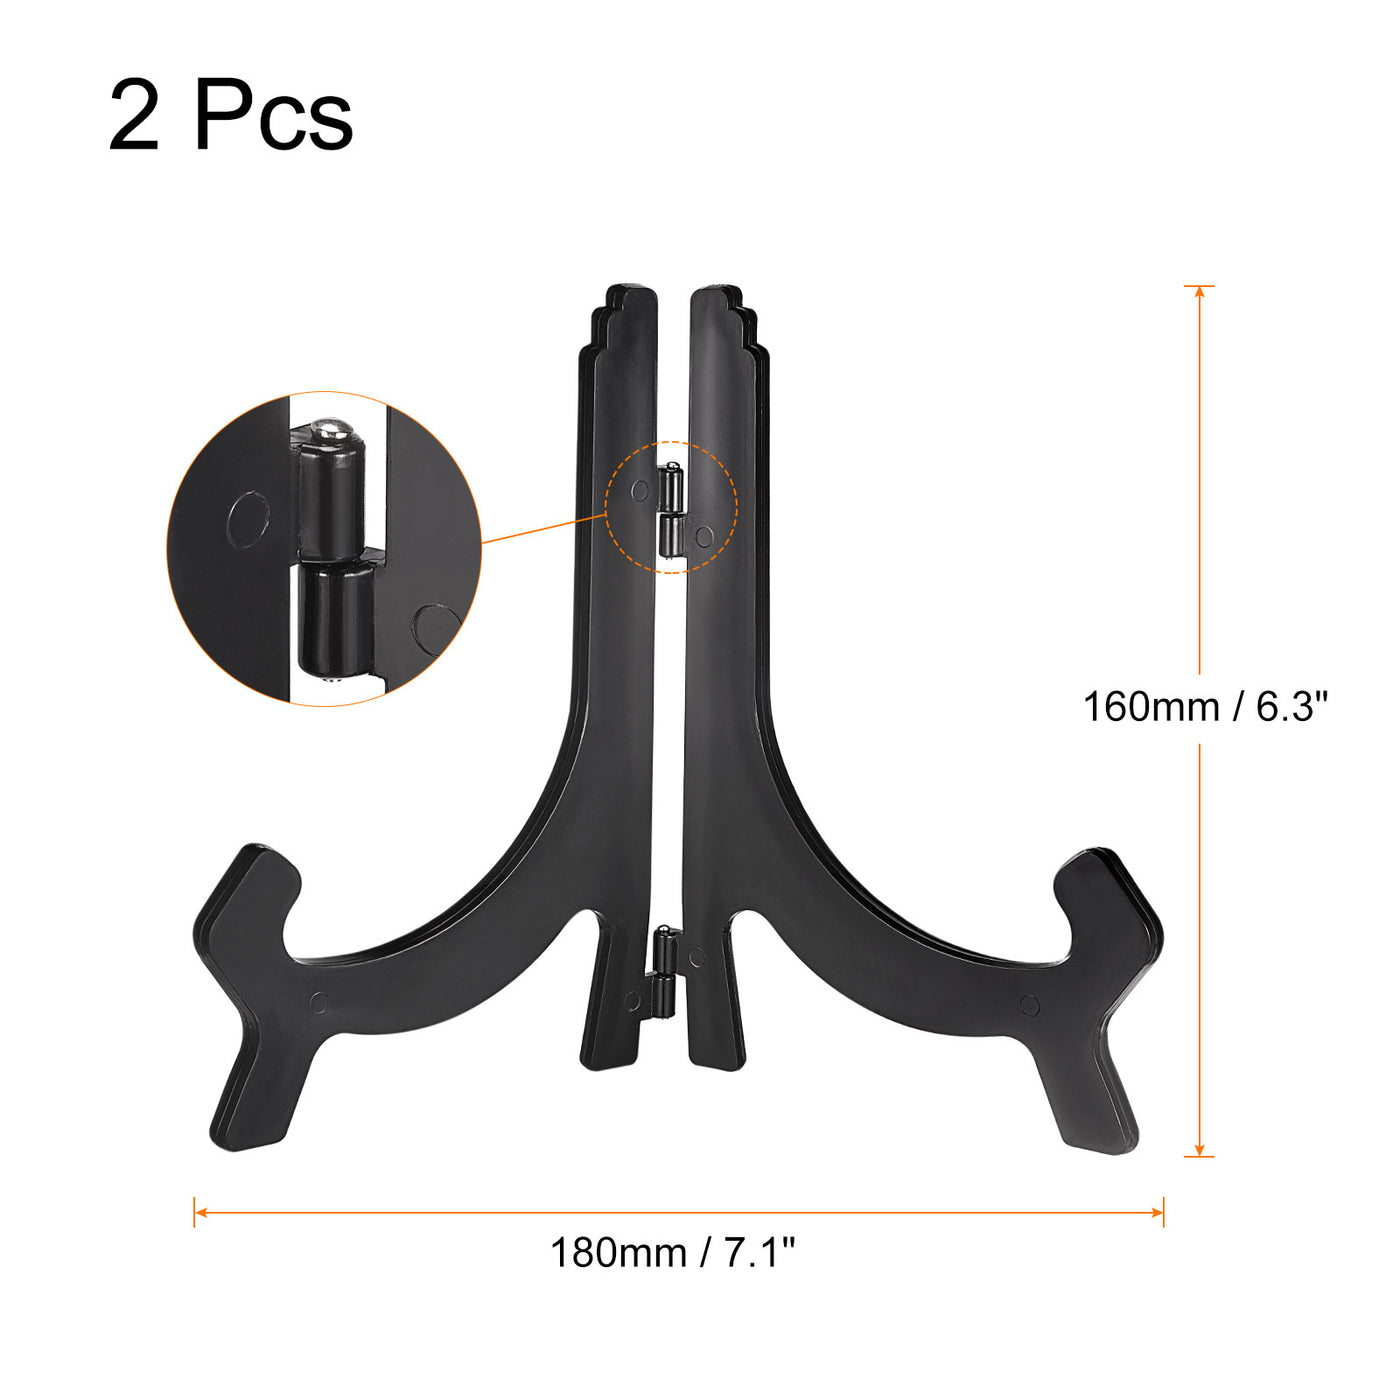 uxcell Uxcell 2pcs 6.3" Easel Plate Holder, Plastic Folding Display Stand Black for Decorative Picture Frame